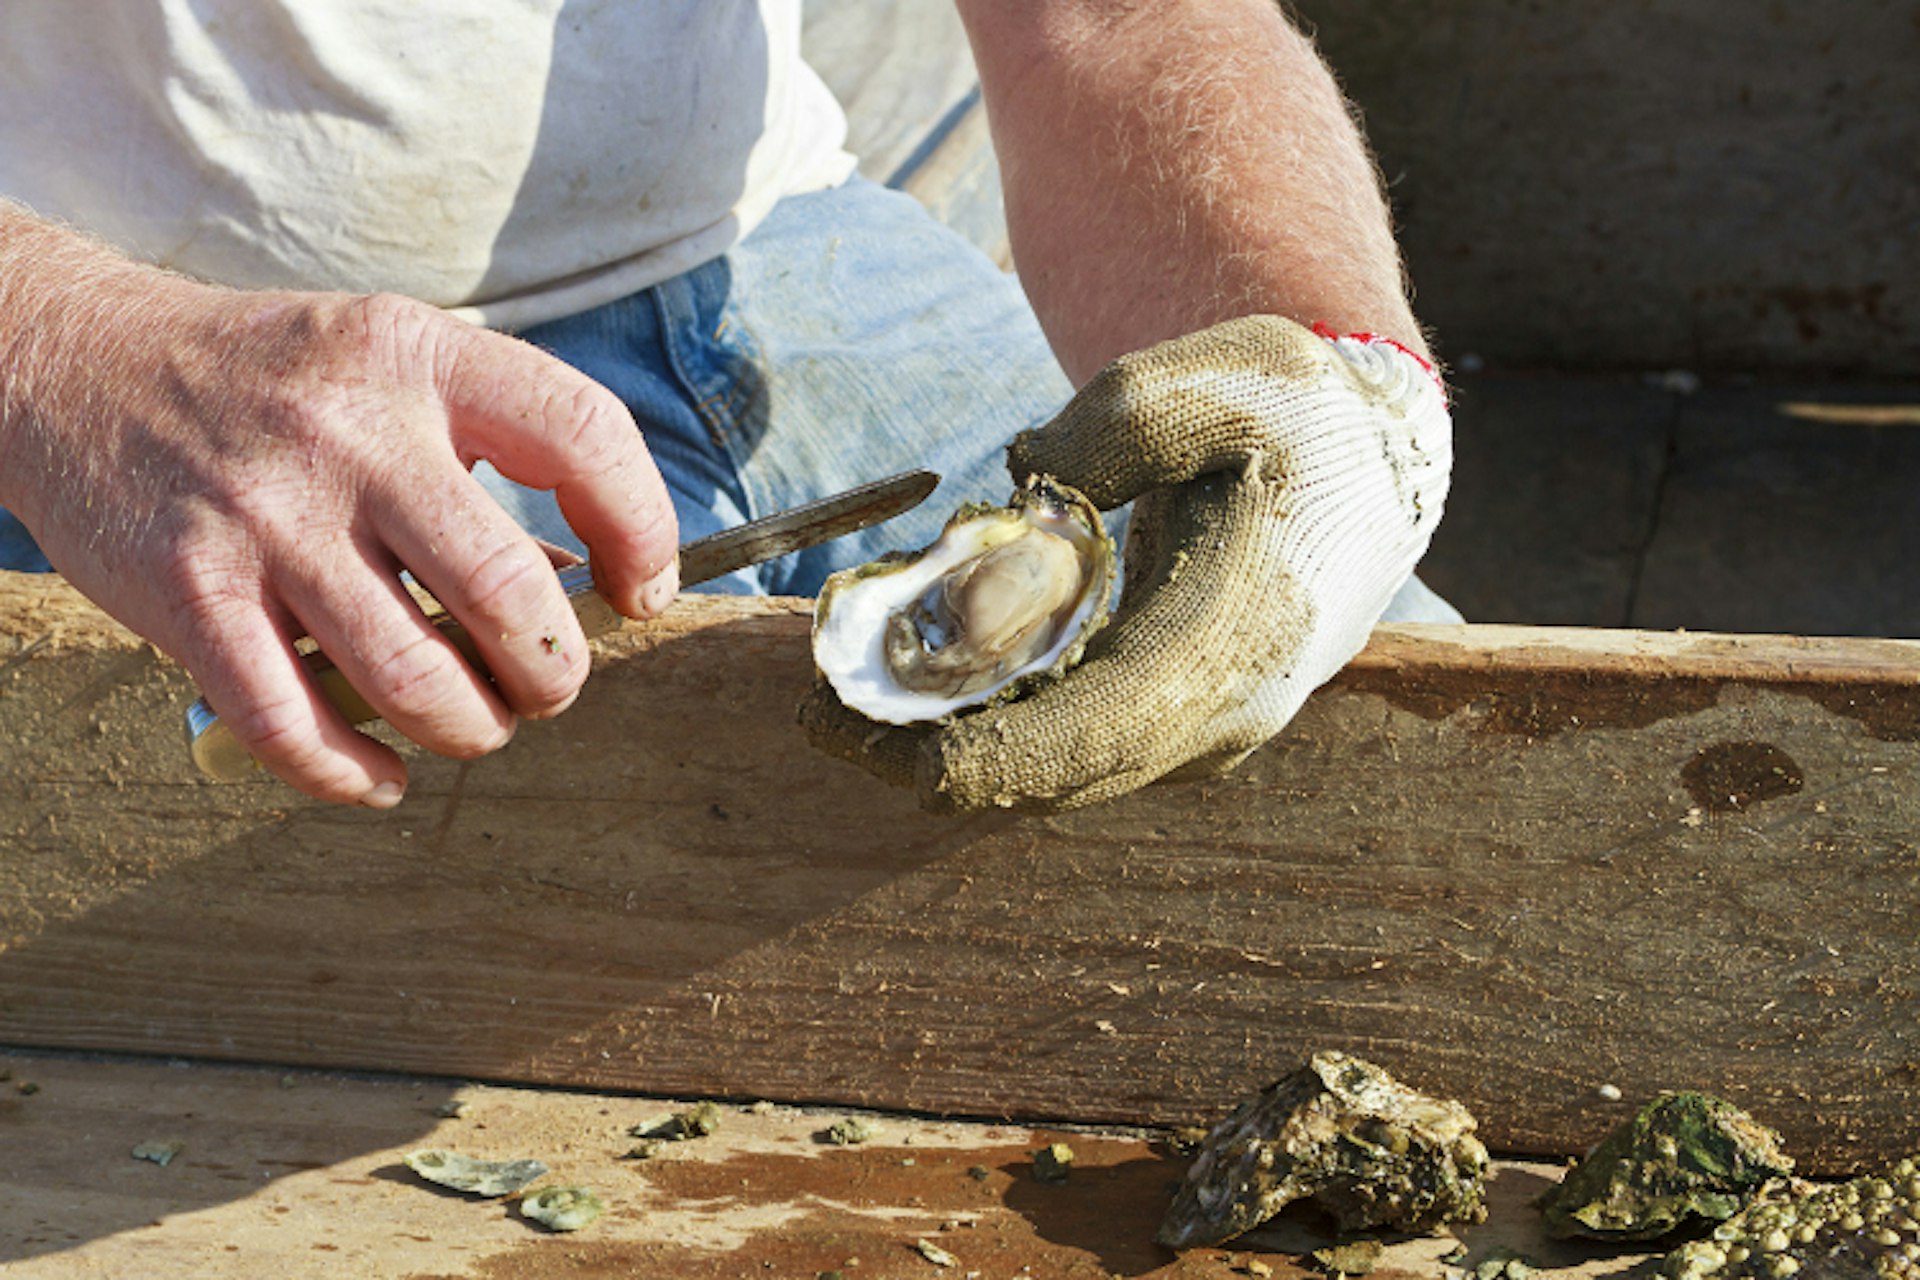 Shucking Apalachicola oysters. Image by Yvette Cardozo / Photolibrary / Getty